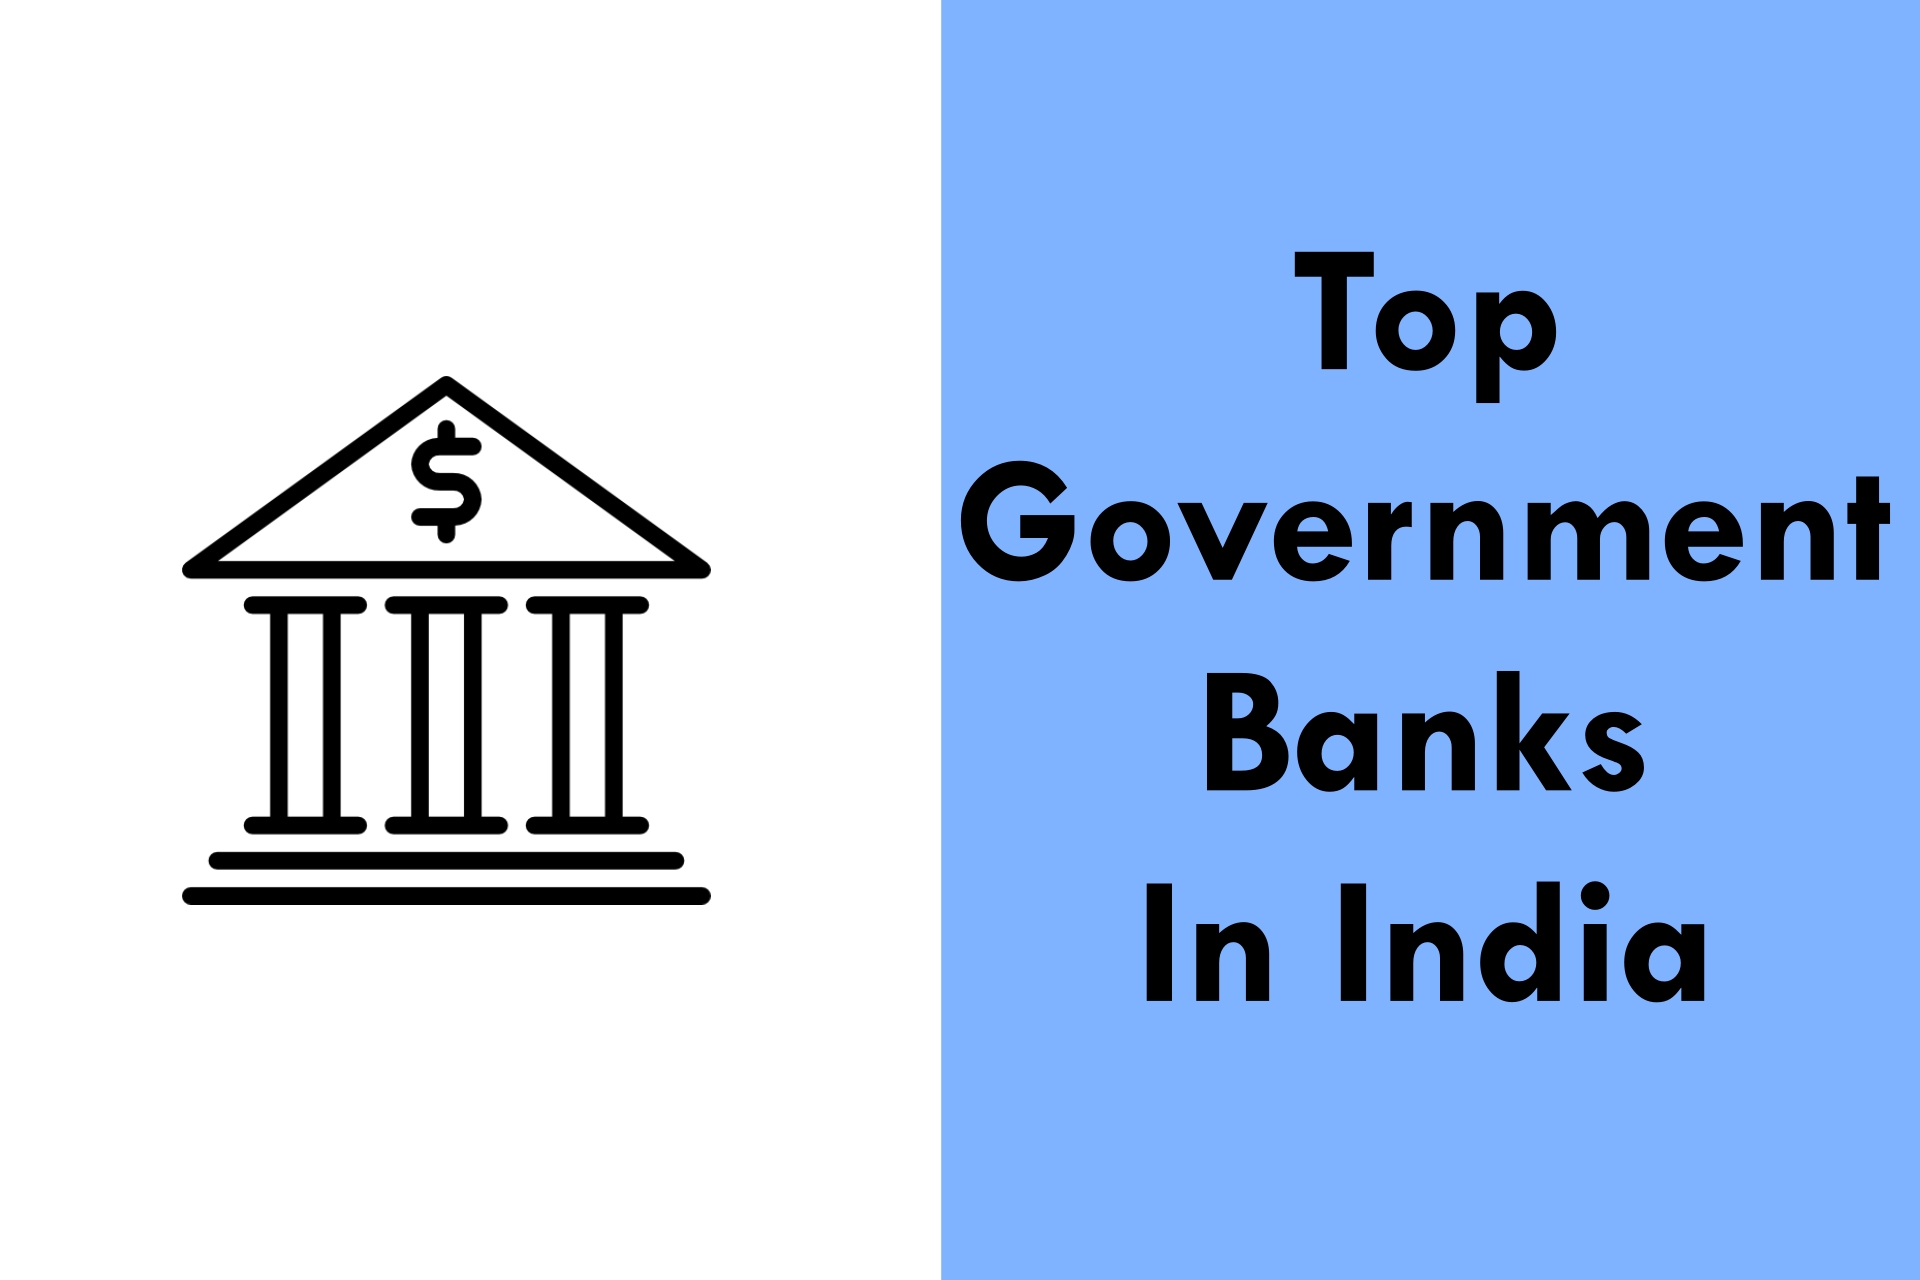 Top Government Banks In India